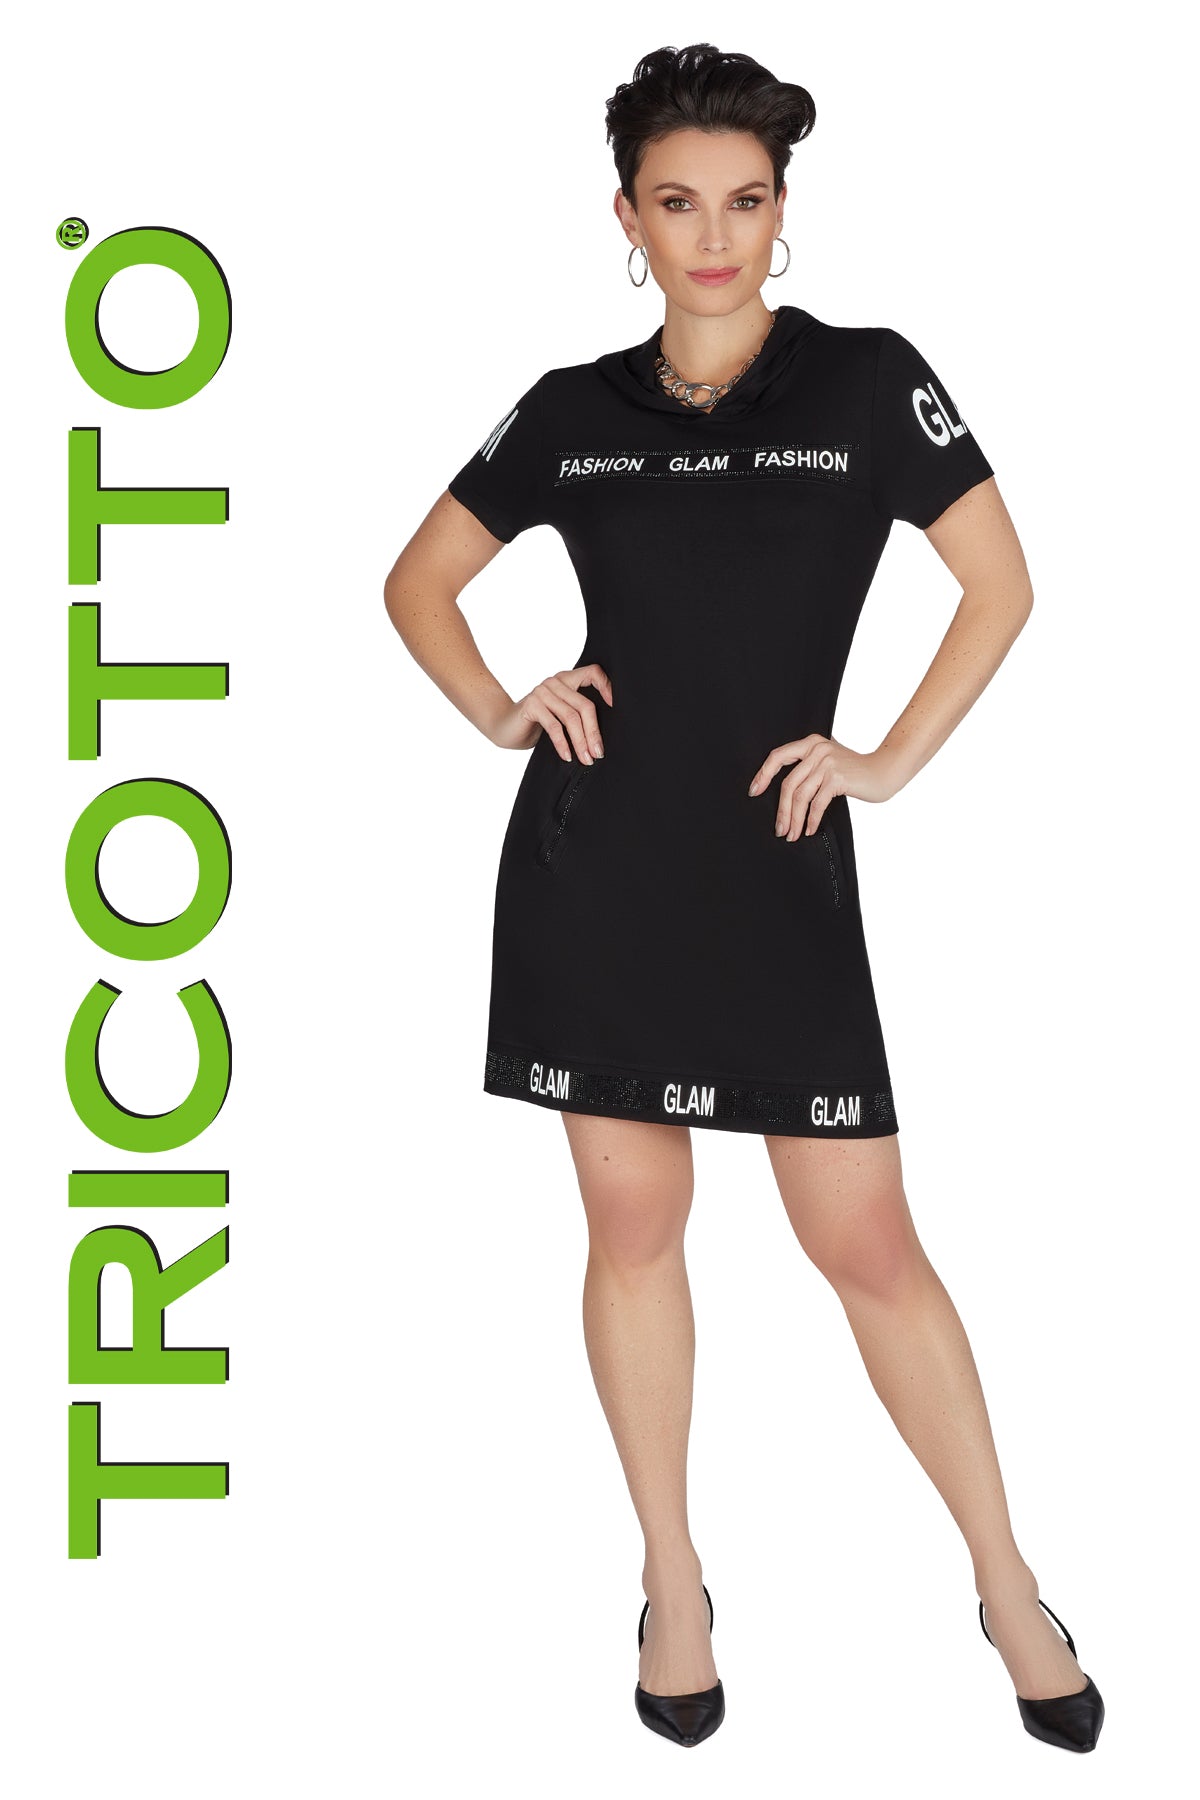 Tricotto Black Dress-Buy Tricotto Black Dresses Online-Tricotto Clothing Quebec-Tricotto Dresses Online Canada-Women's Black Dresses Online Canada